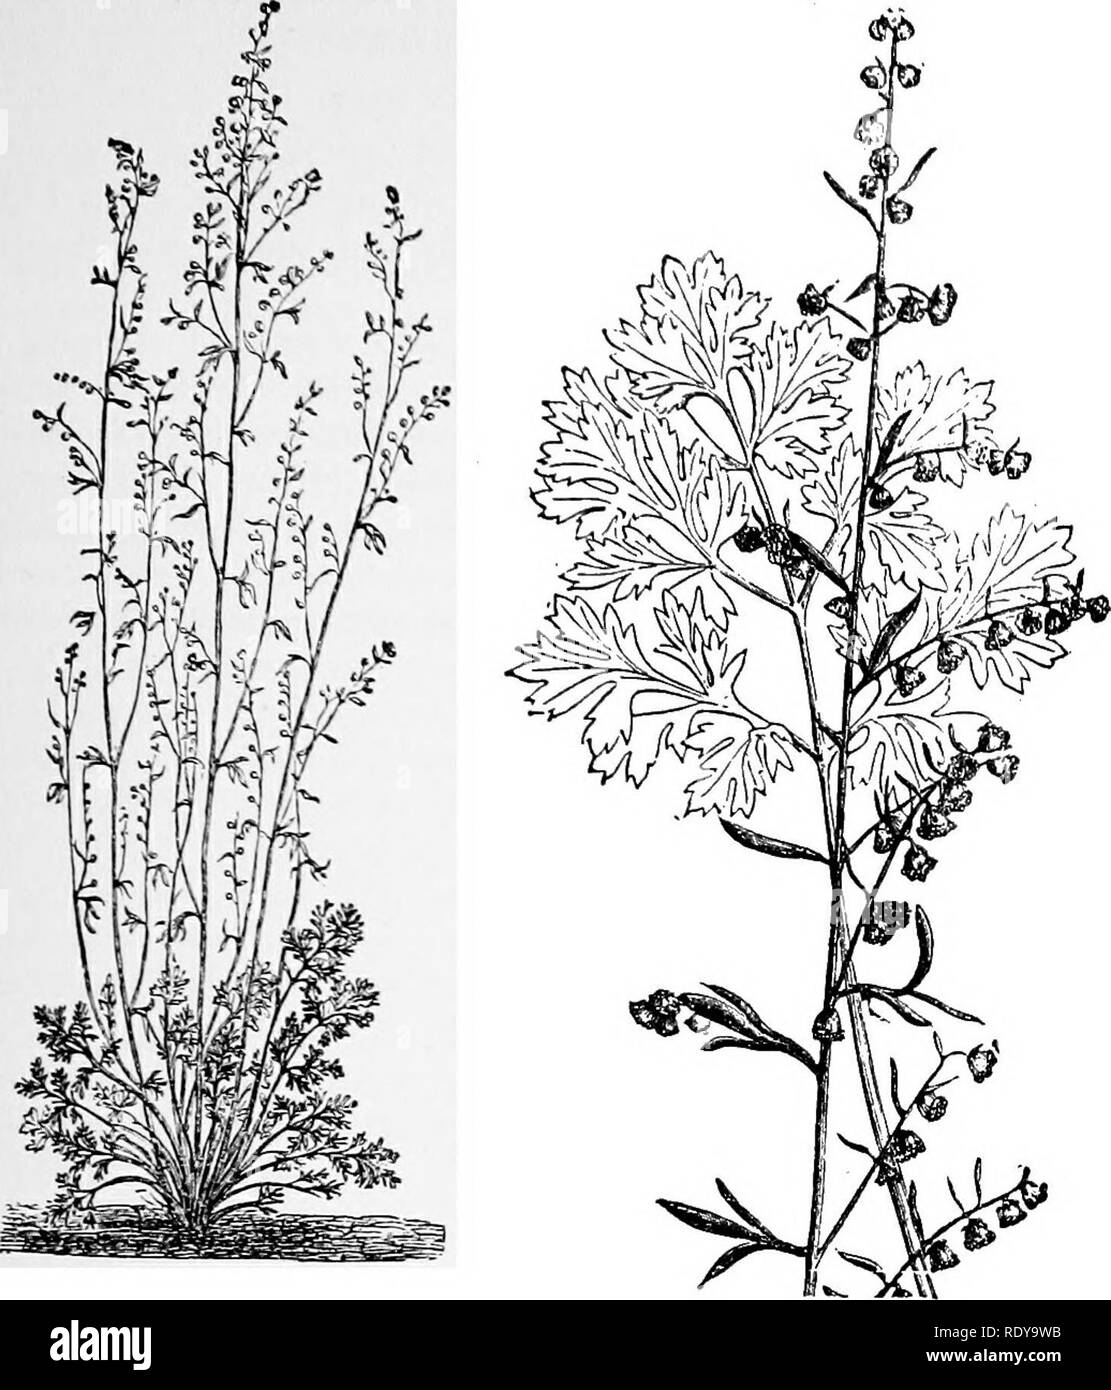 . A manual of poisonous plants, chiefly of eastern North America, with brief notes on economic and medicinal plants, and numerous illustrations. Poisonous plants. COMPOSITAE —THISTLE FAMILY —WORMWOOD 791. Fig. 453. Artemisia. Sage Brush. Absinthe and Wormwood belong to this genius.. (After Faguet). perfect and fertile with branches of the style truncate or sometimes sterile with ovaries abortive; styles undivided; marginal flowers usually pistillate and' fertile, or flowers all perfect and fertile in some species; anthers often tipped with subulate appendages; achenes obovoid and no pappus. Ab Stock Photo